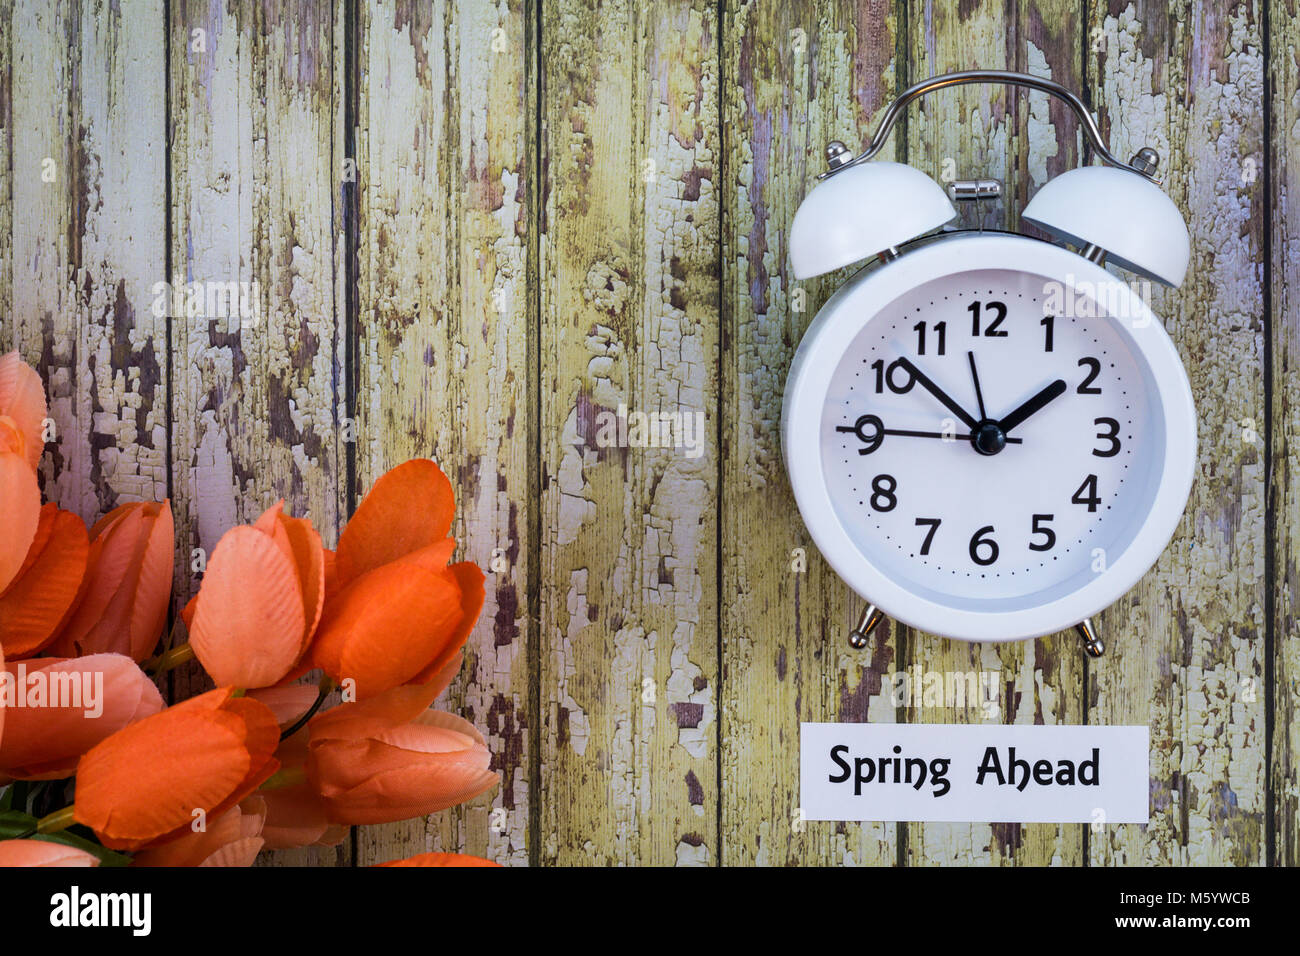 Daylight Saving Time. Change clock to summer time. - Stock Image -  Everypixel